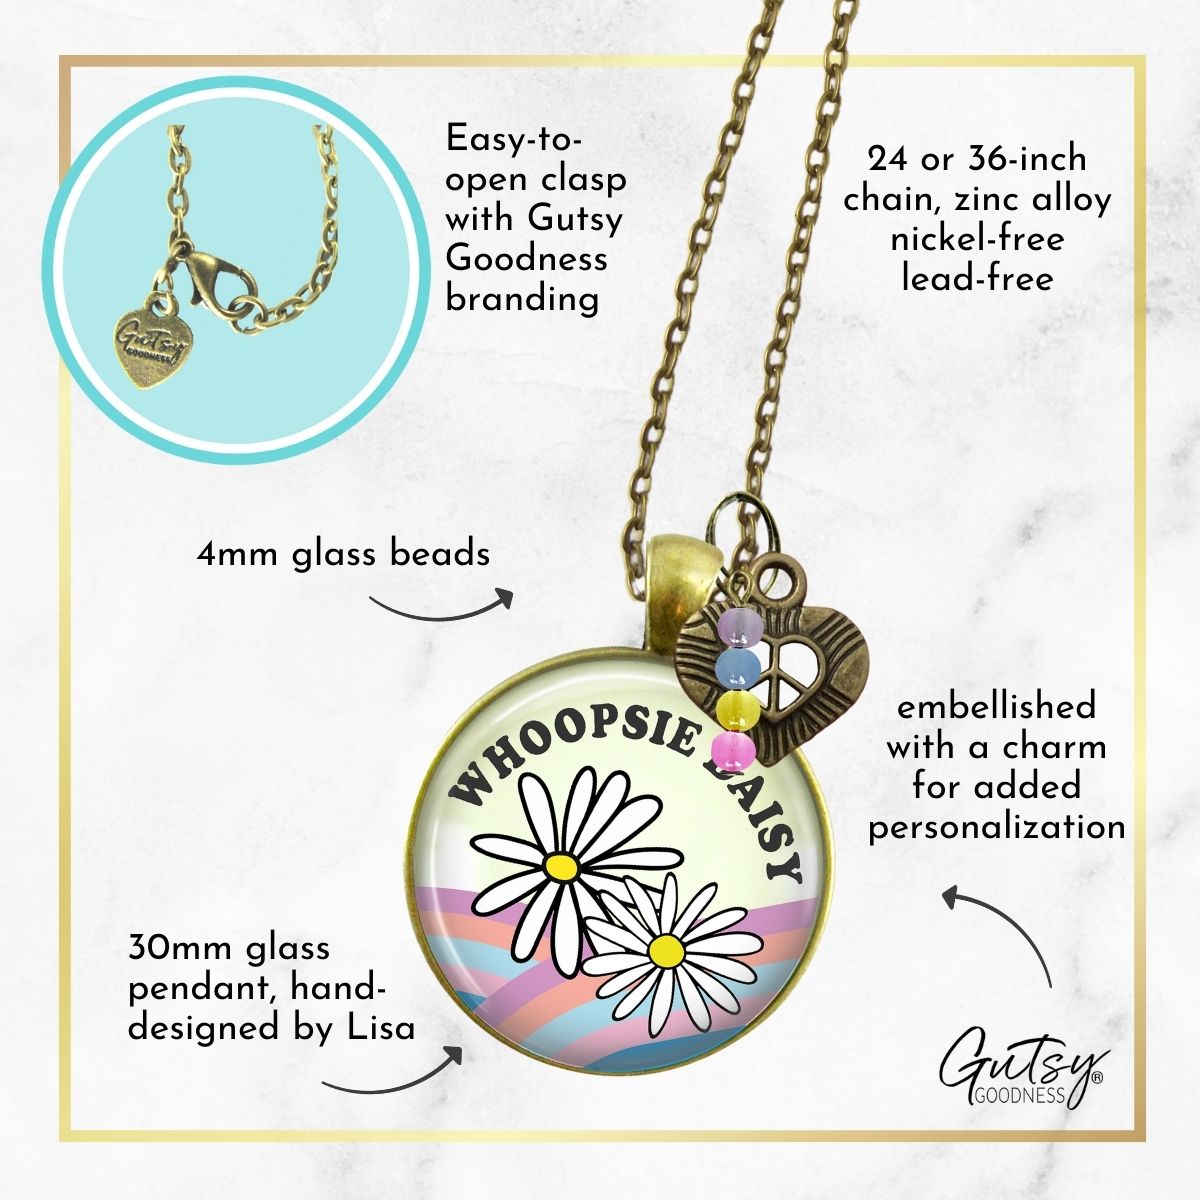 Handmade Gutsy Goodness Jewelry Counting My Blessings Under The Neon Moon Necklace Southwest Boho Style Charm Jewelry & Card